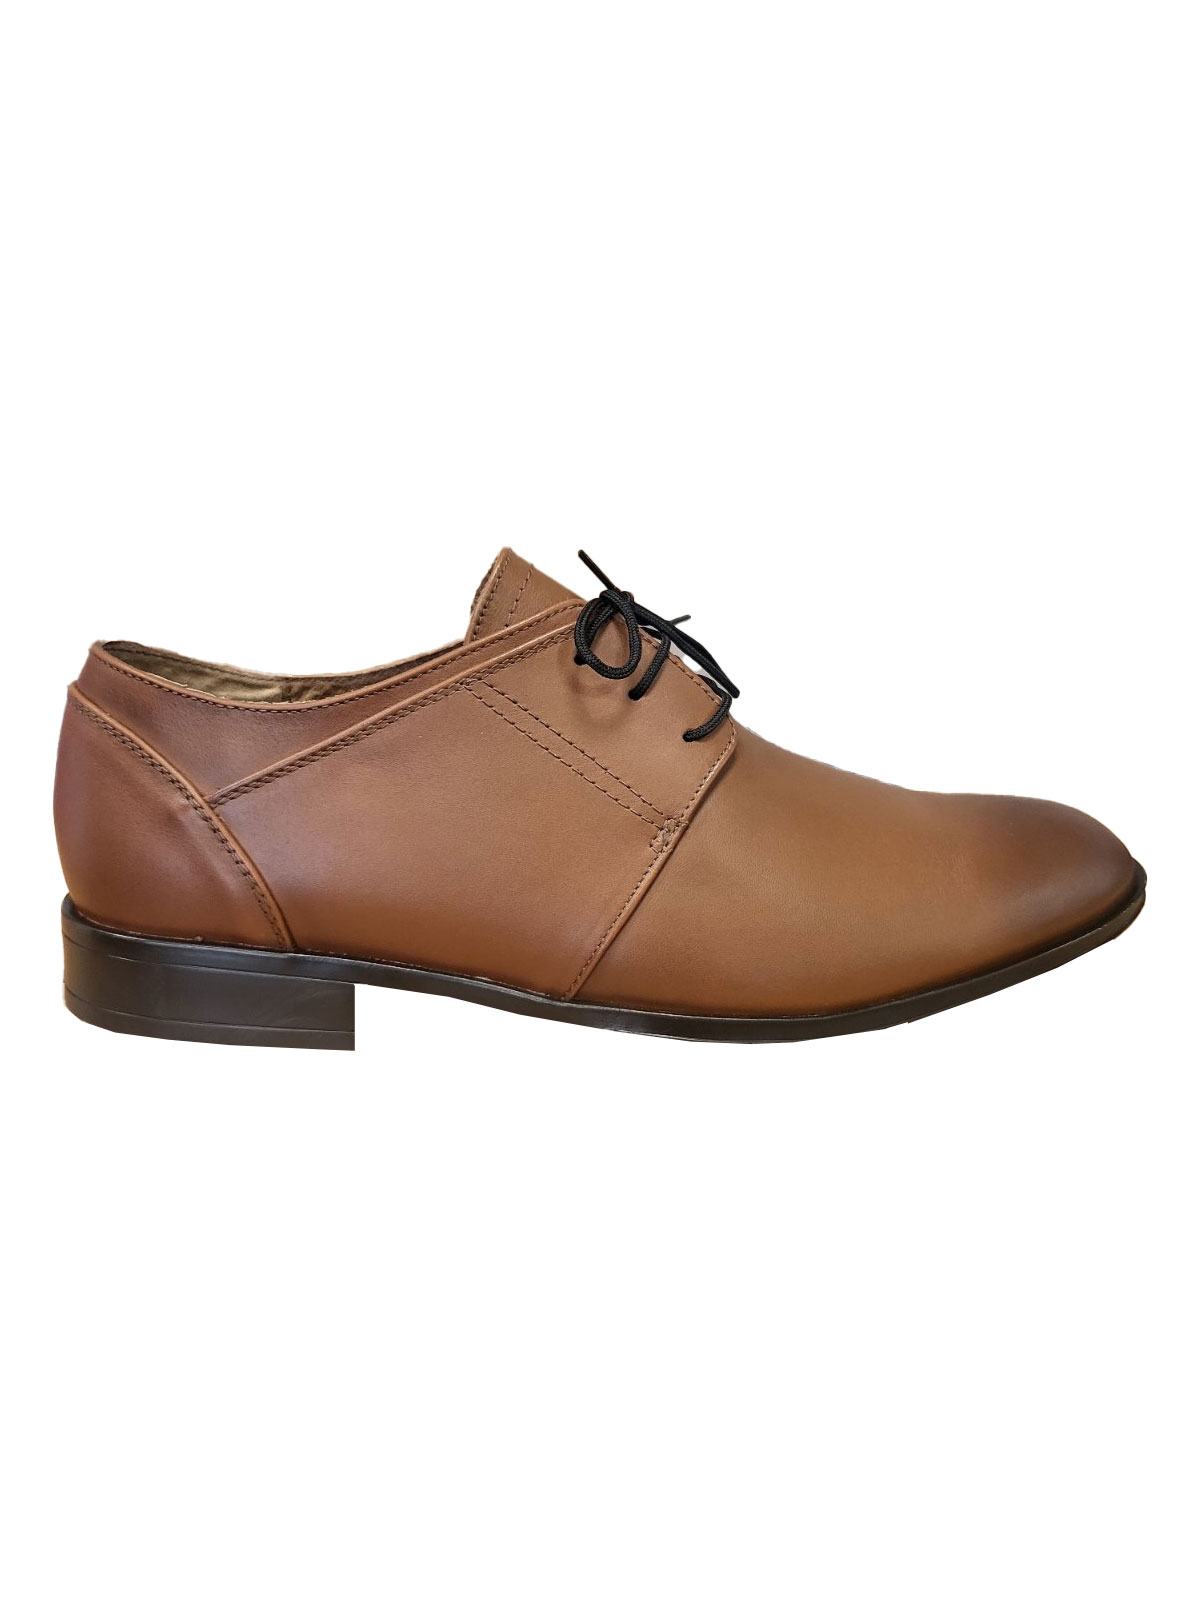 Mens classic shoes in brown - 81108 - € 83.24 img2